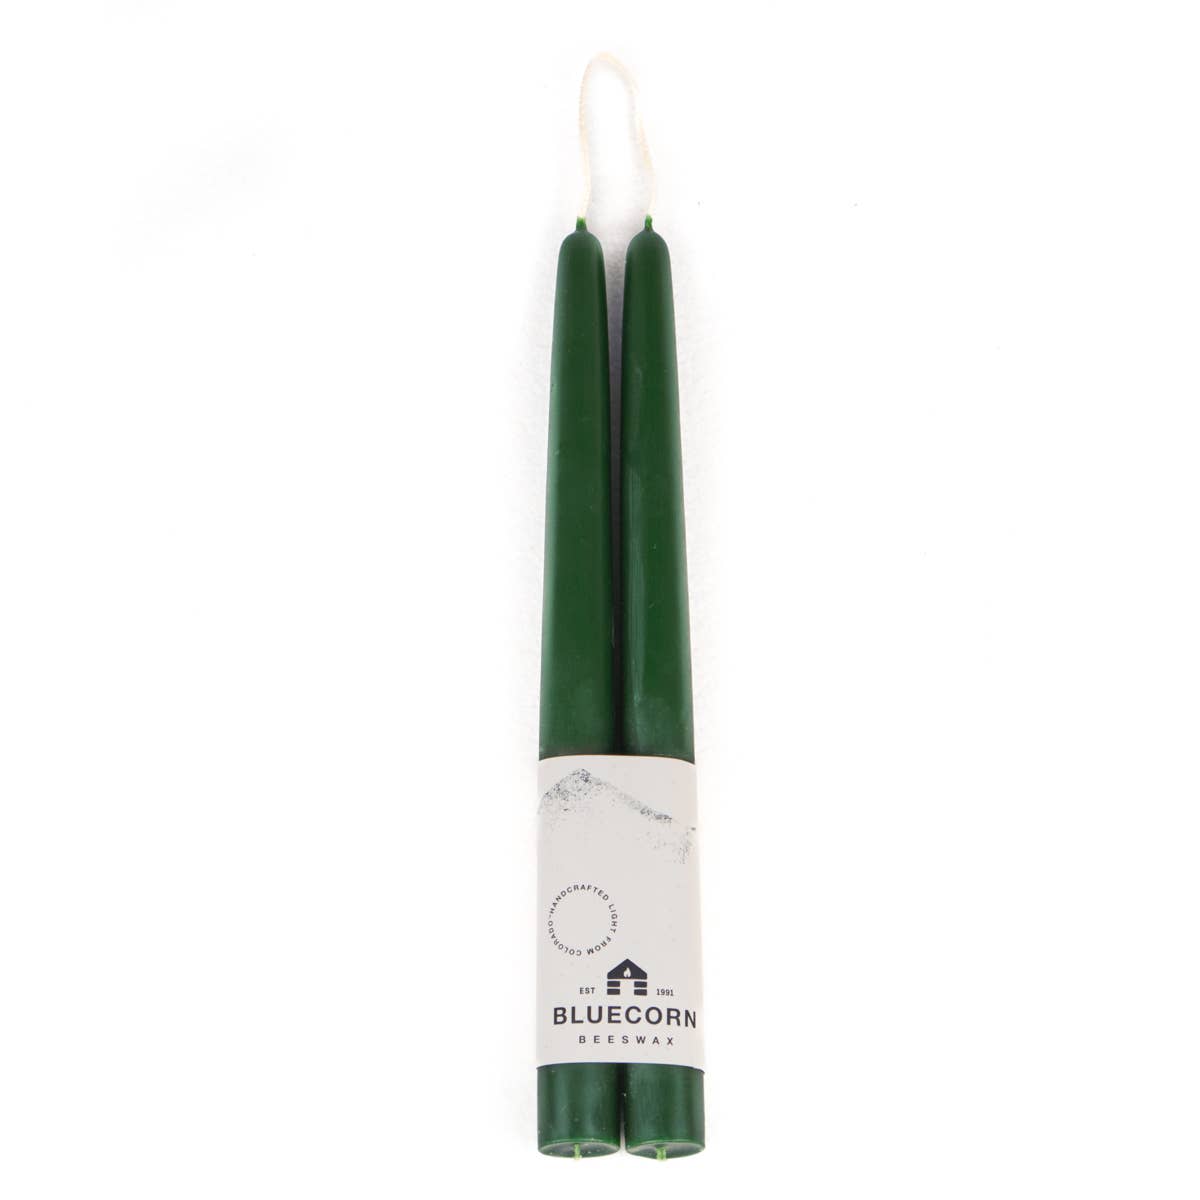 Pair of Hand-Dipped Beeswax Taper Candles: 8" / Black Bluecorn Candles